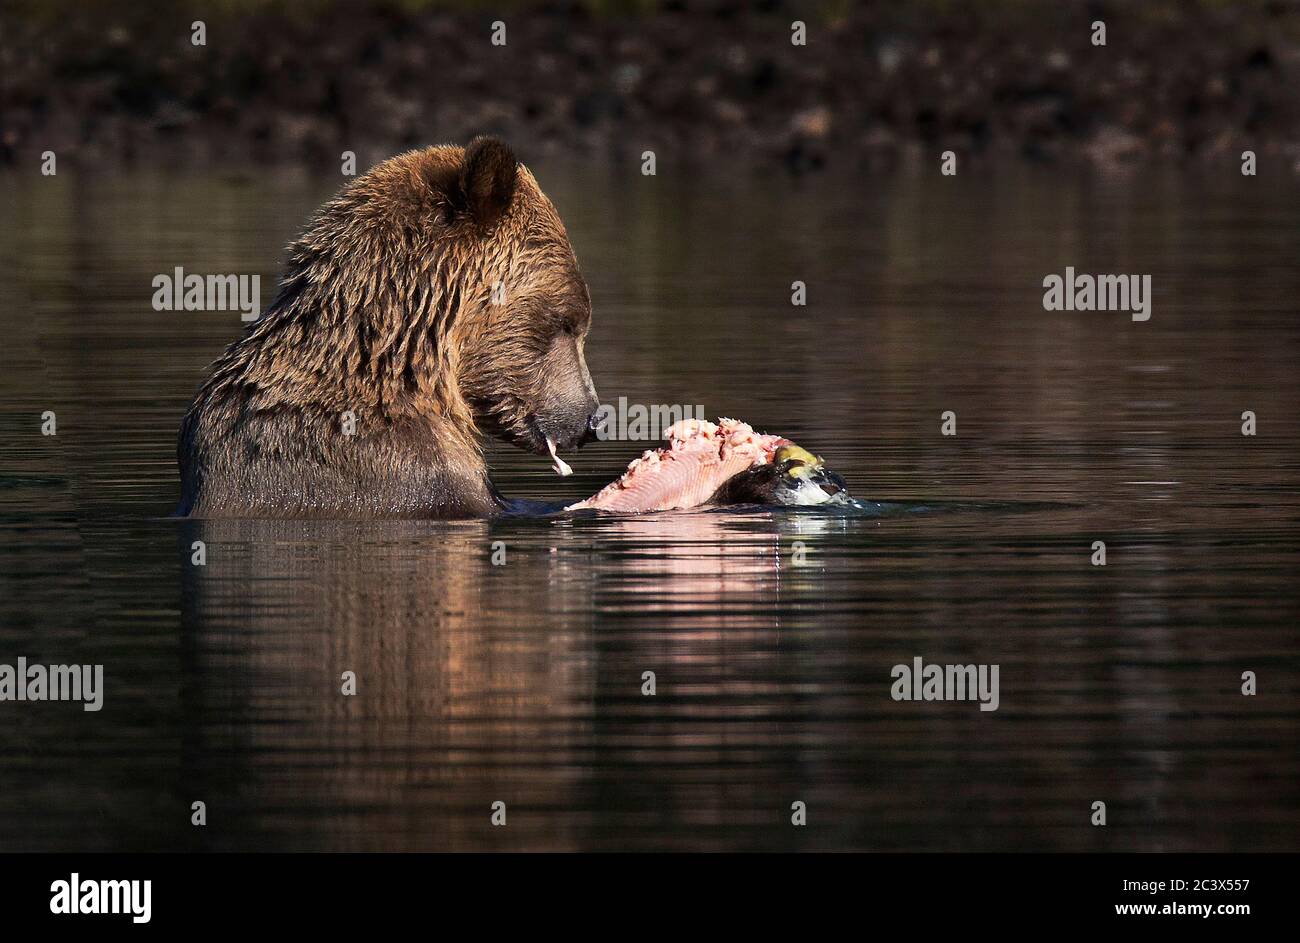 Grizzly bear mother and cub fishing. Cub eating salmon. Stock Photo